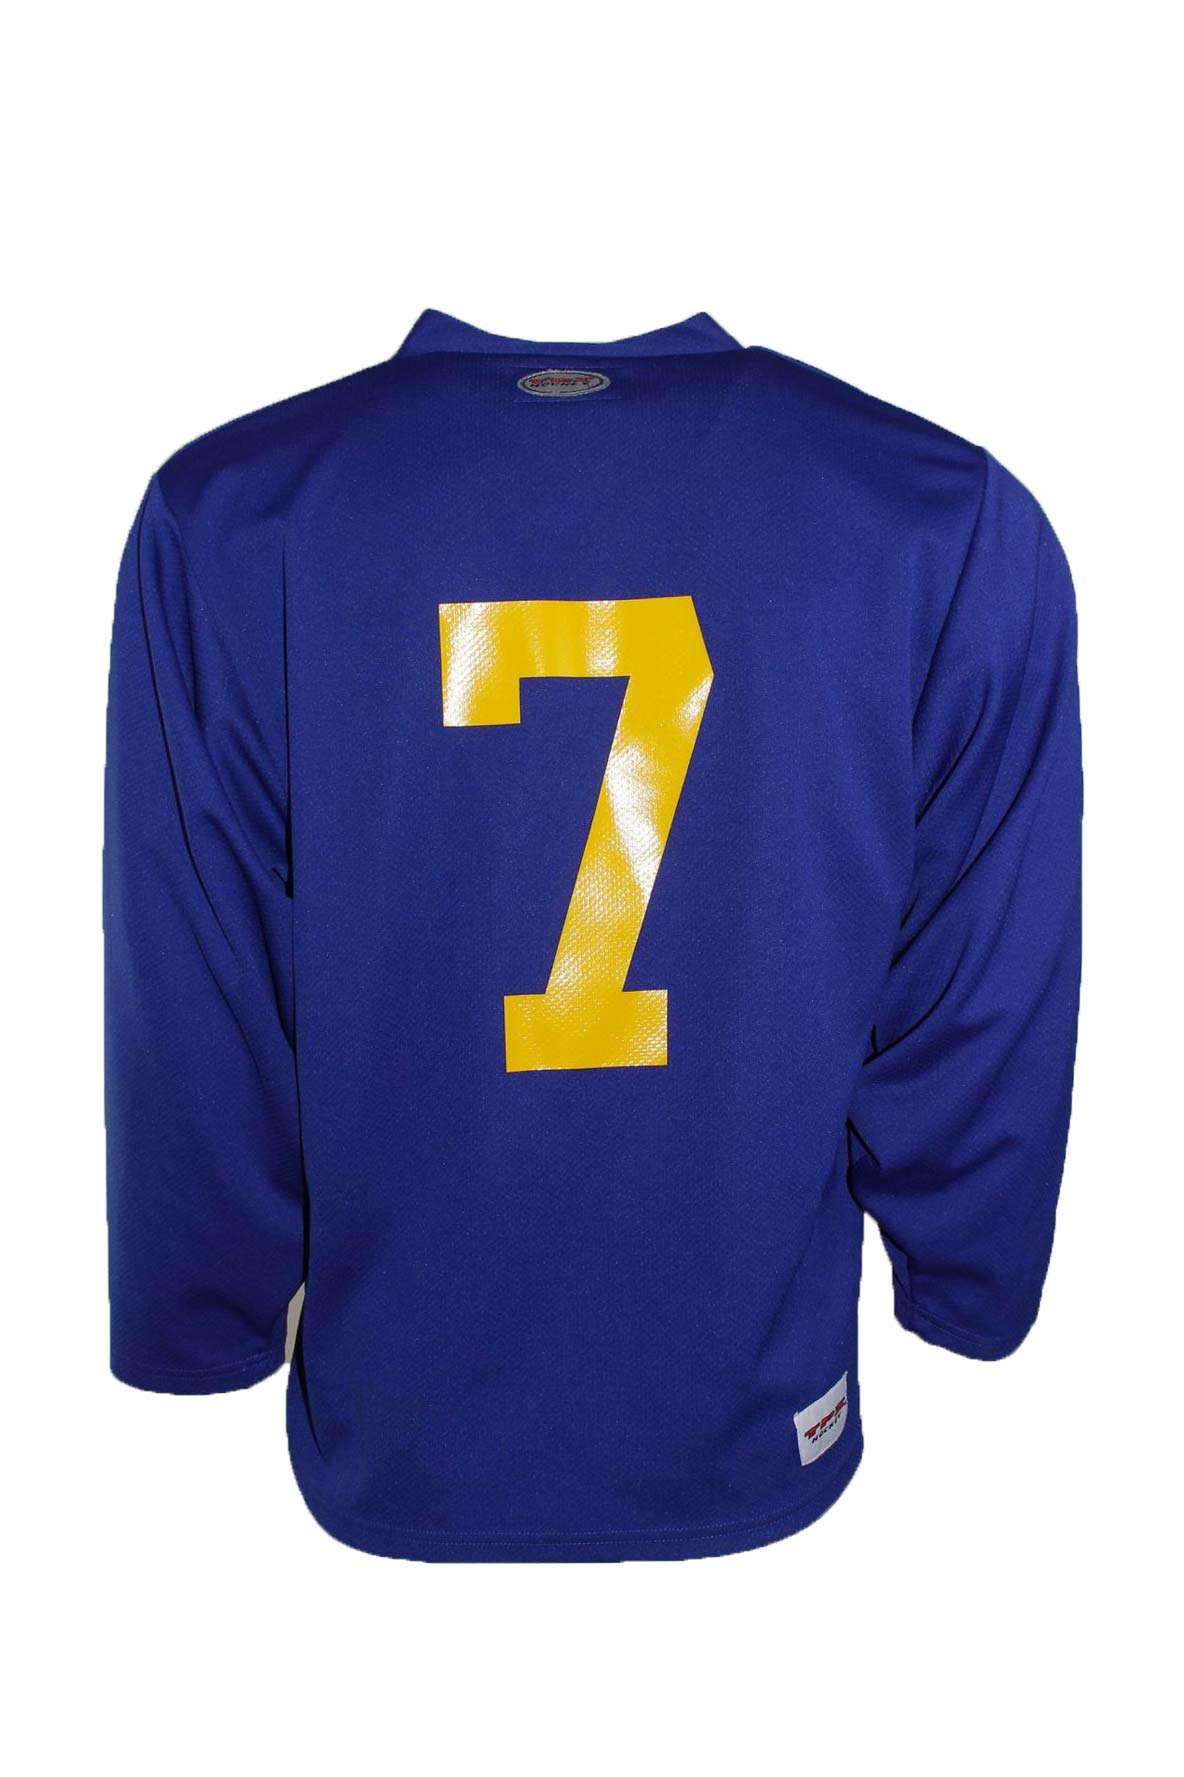 Vintage St. Louis Blues Hockey Jersey – 18th Street Vintage Chicago